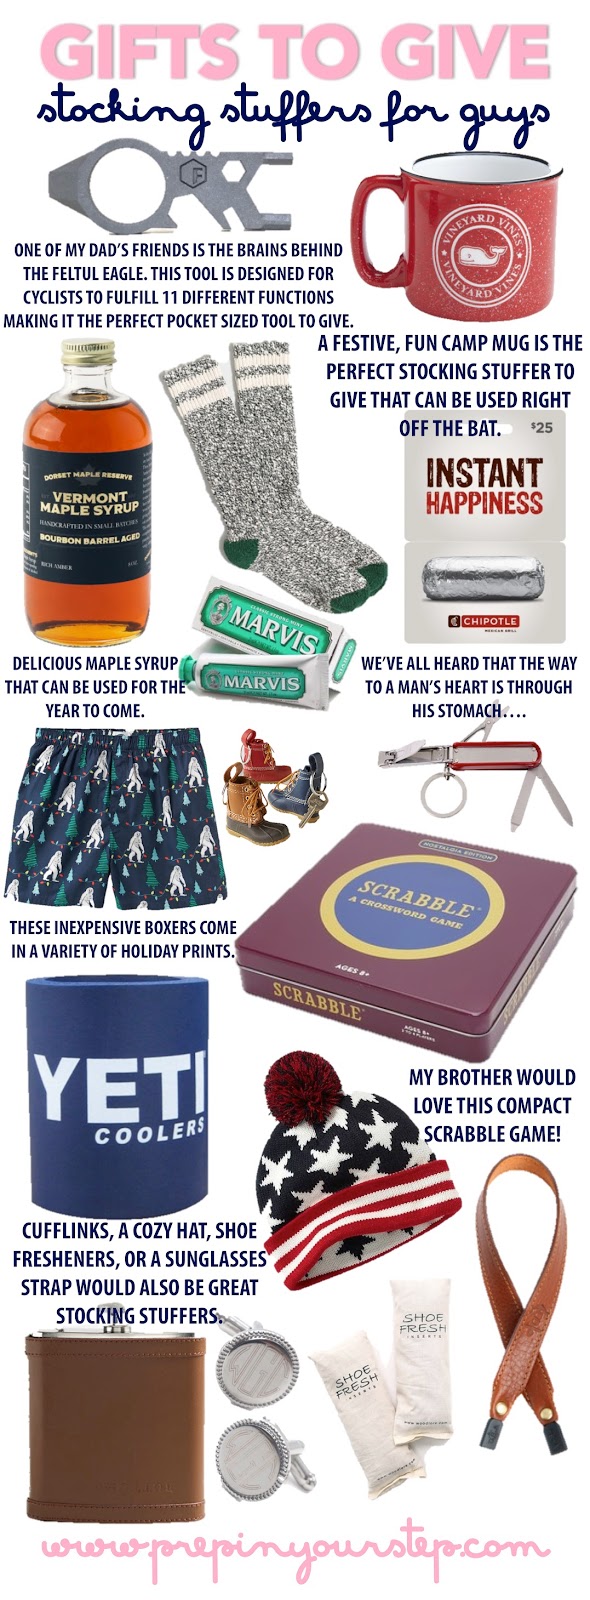 Prep In Your Step: Gifts to Give Stocking Stuffers (For Guys & Girls)